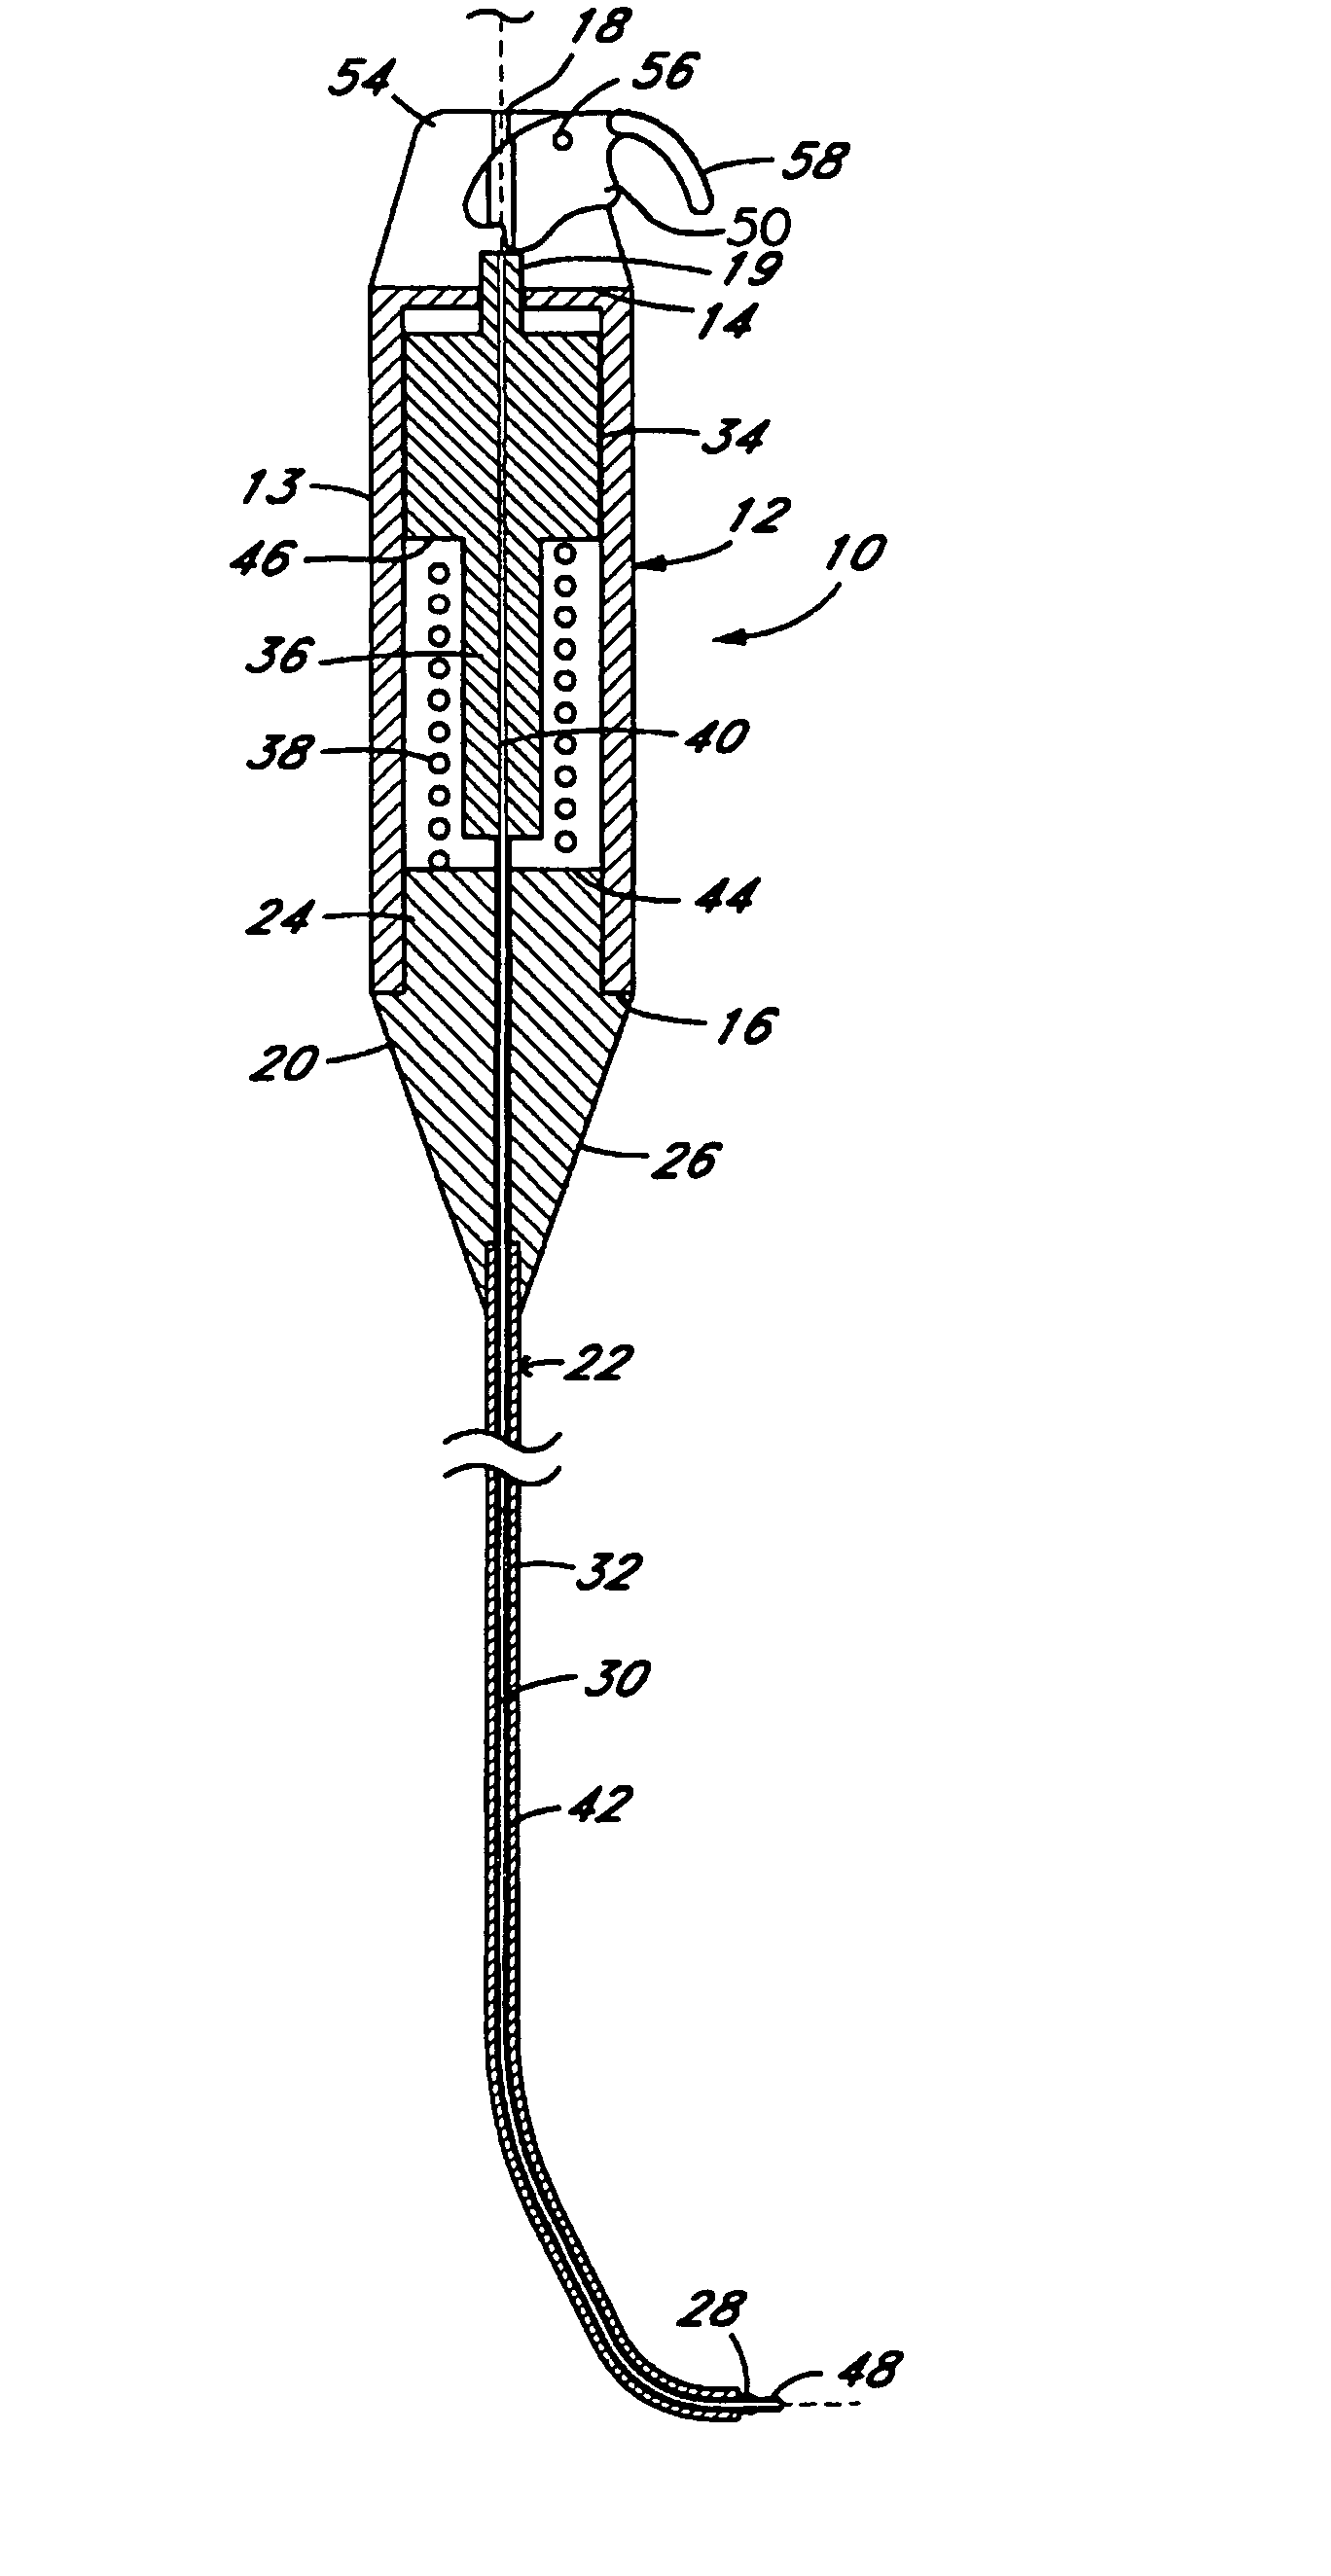 Systems, devices, and methods for minimally invasive pelvic surgery